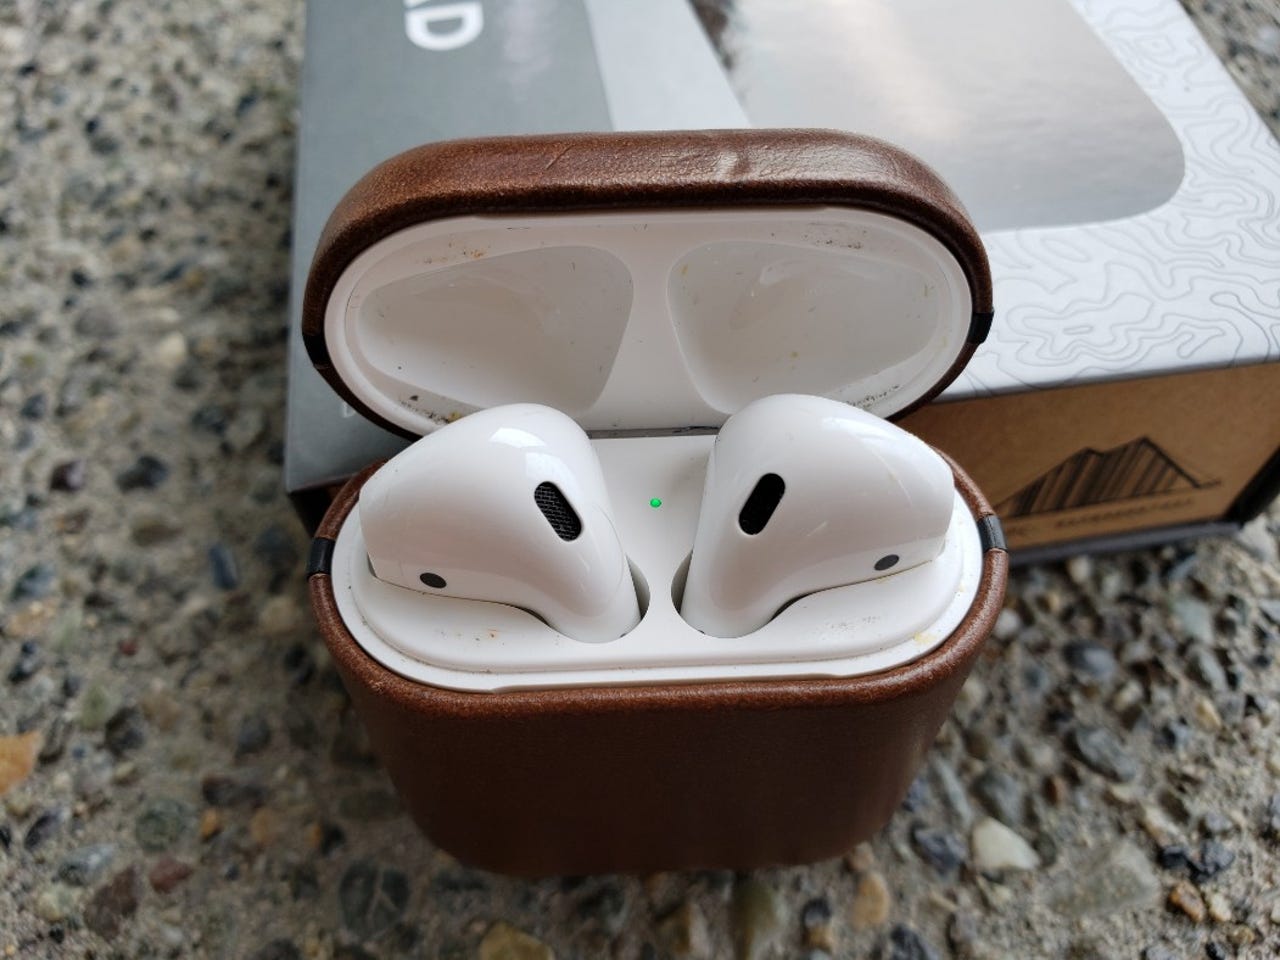 nomad-airpods-case-5.jpg